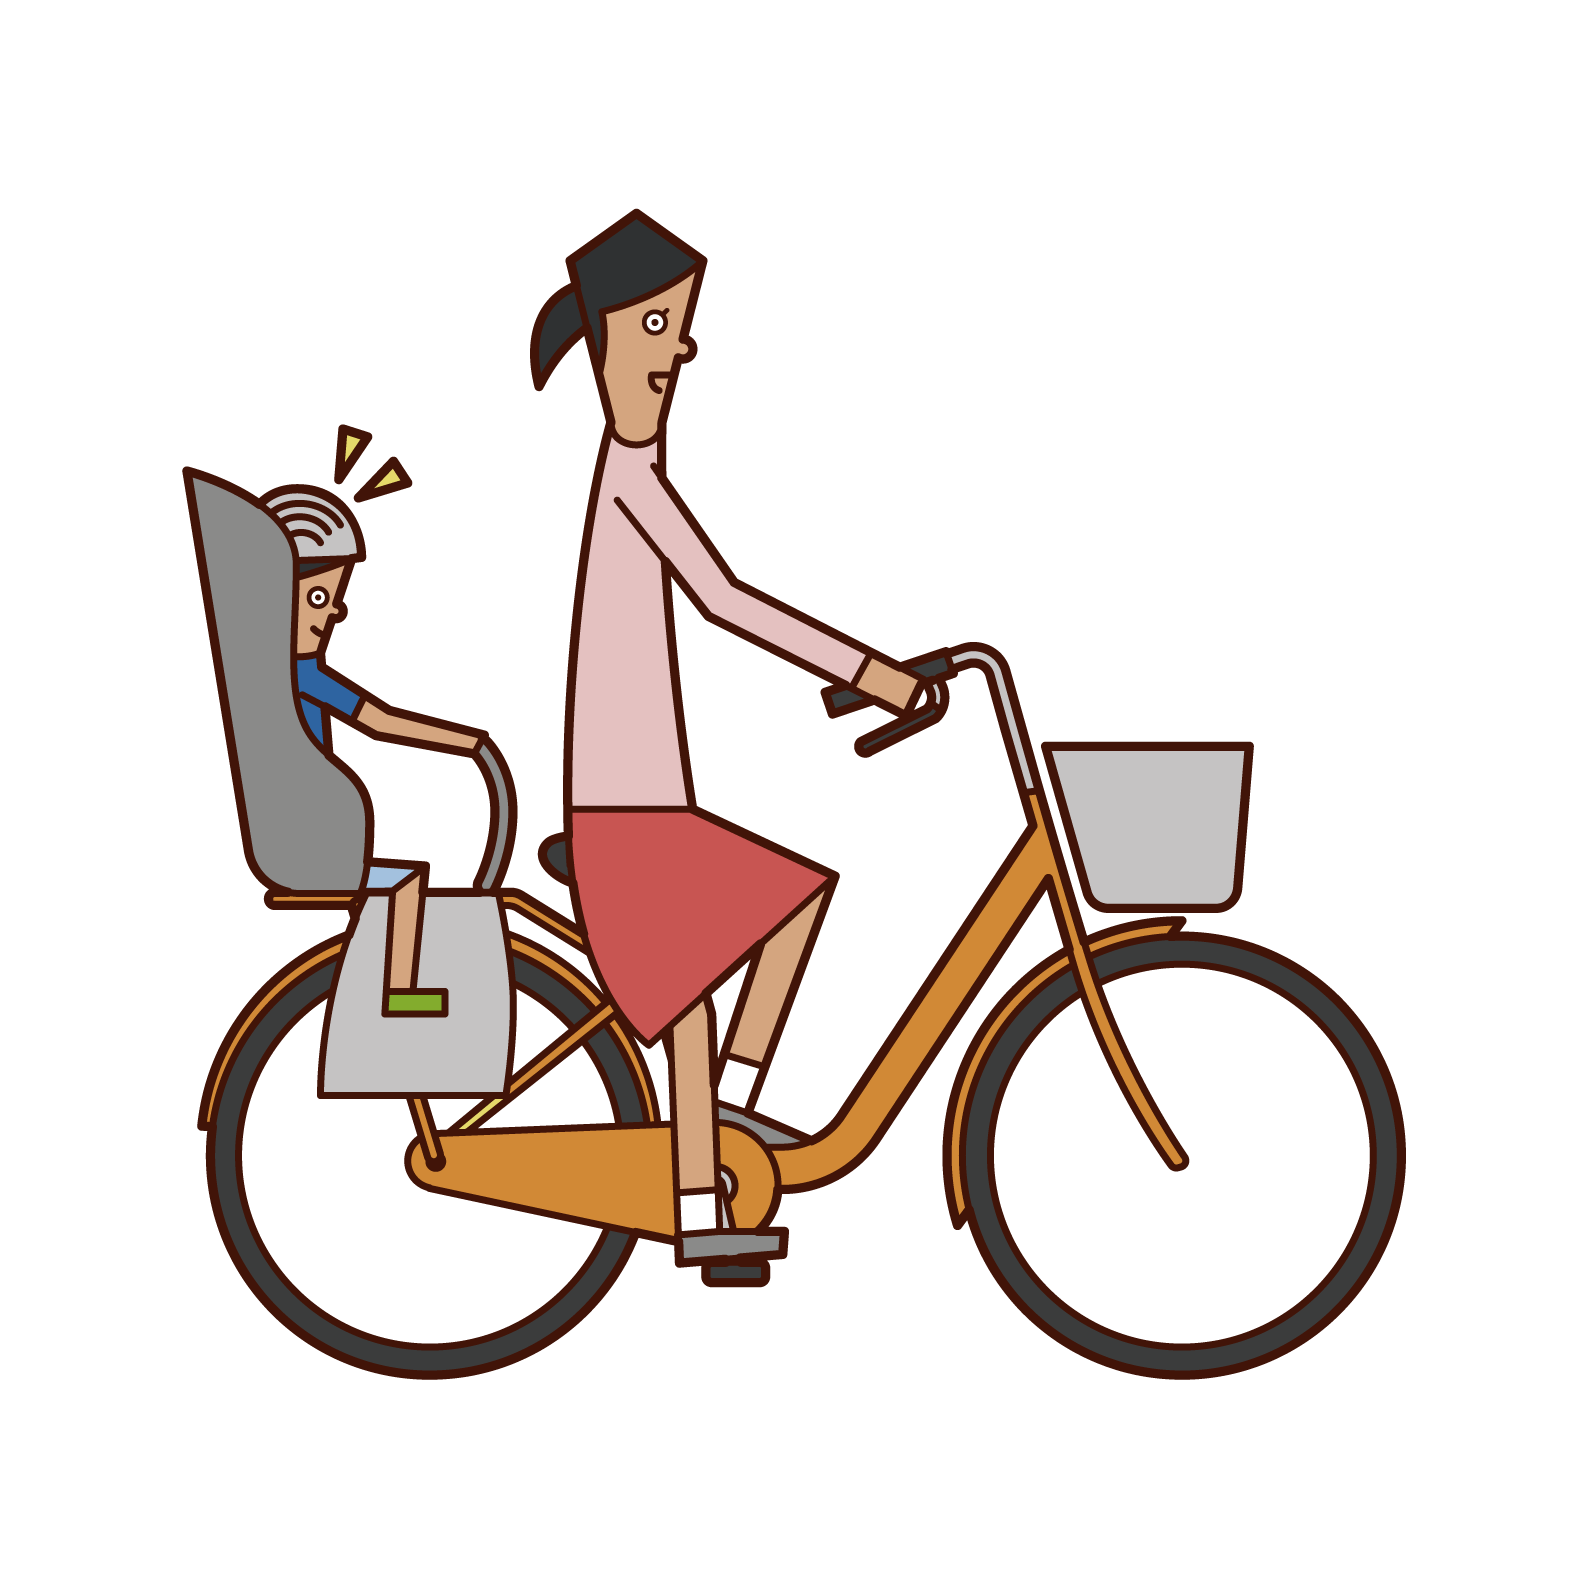 Illustration of a woman riding a bicycle with a child wearing a helmet